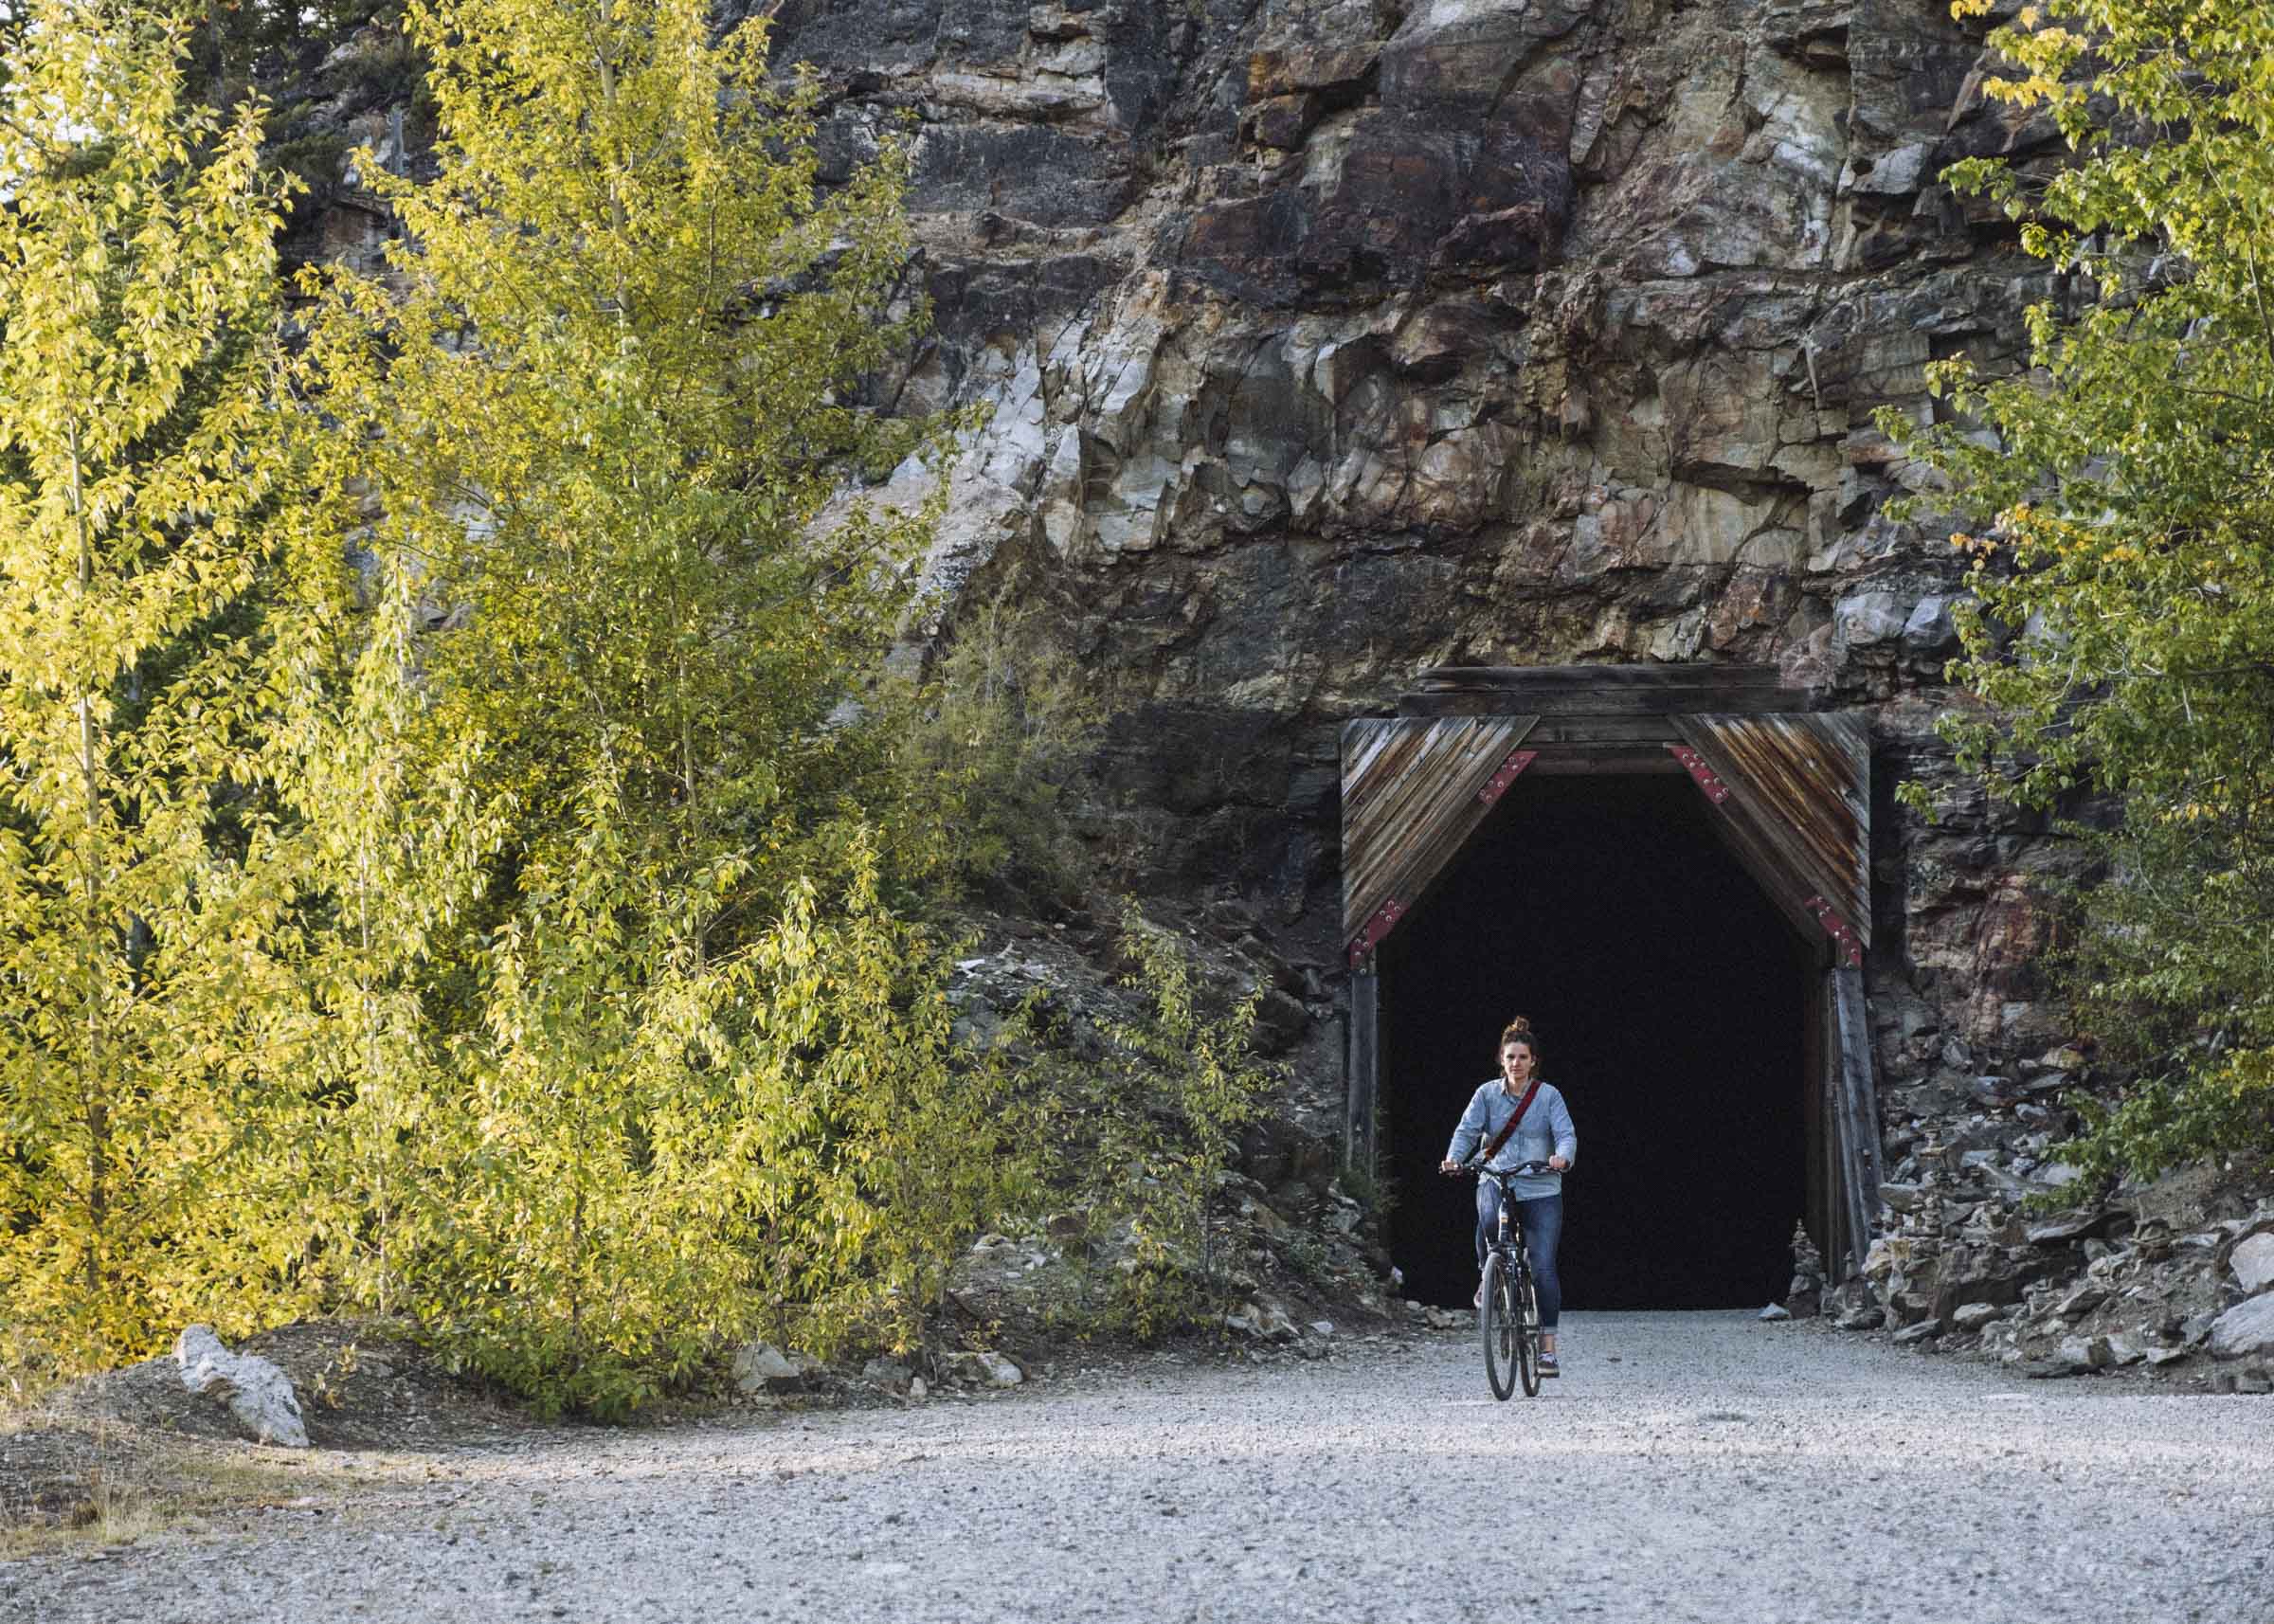 Riding through the tunnels of the historic Kettle Valley Railway